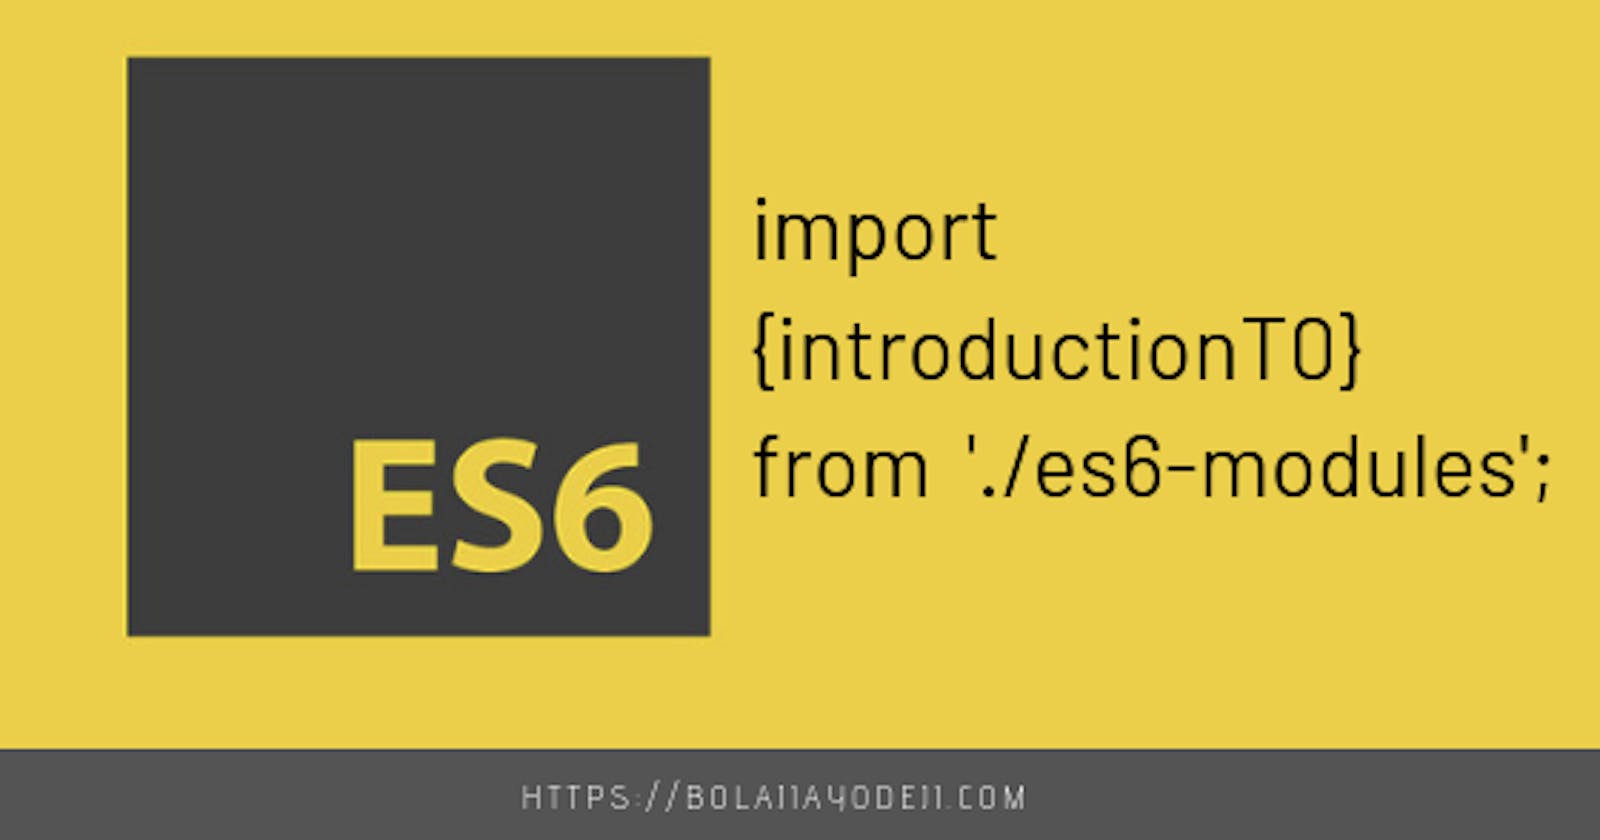 Introduction to ES6 modules